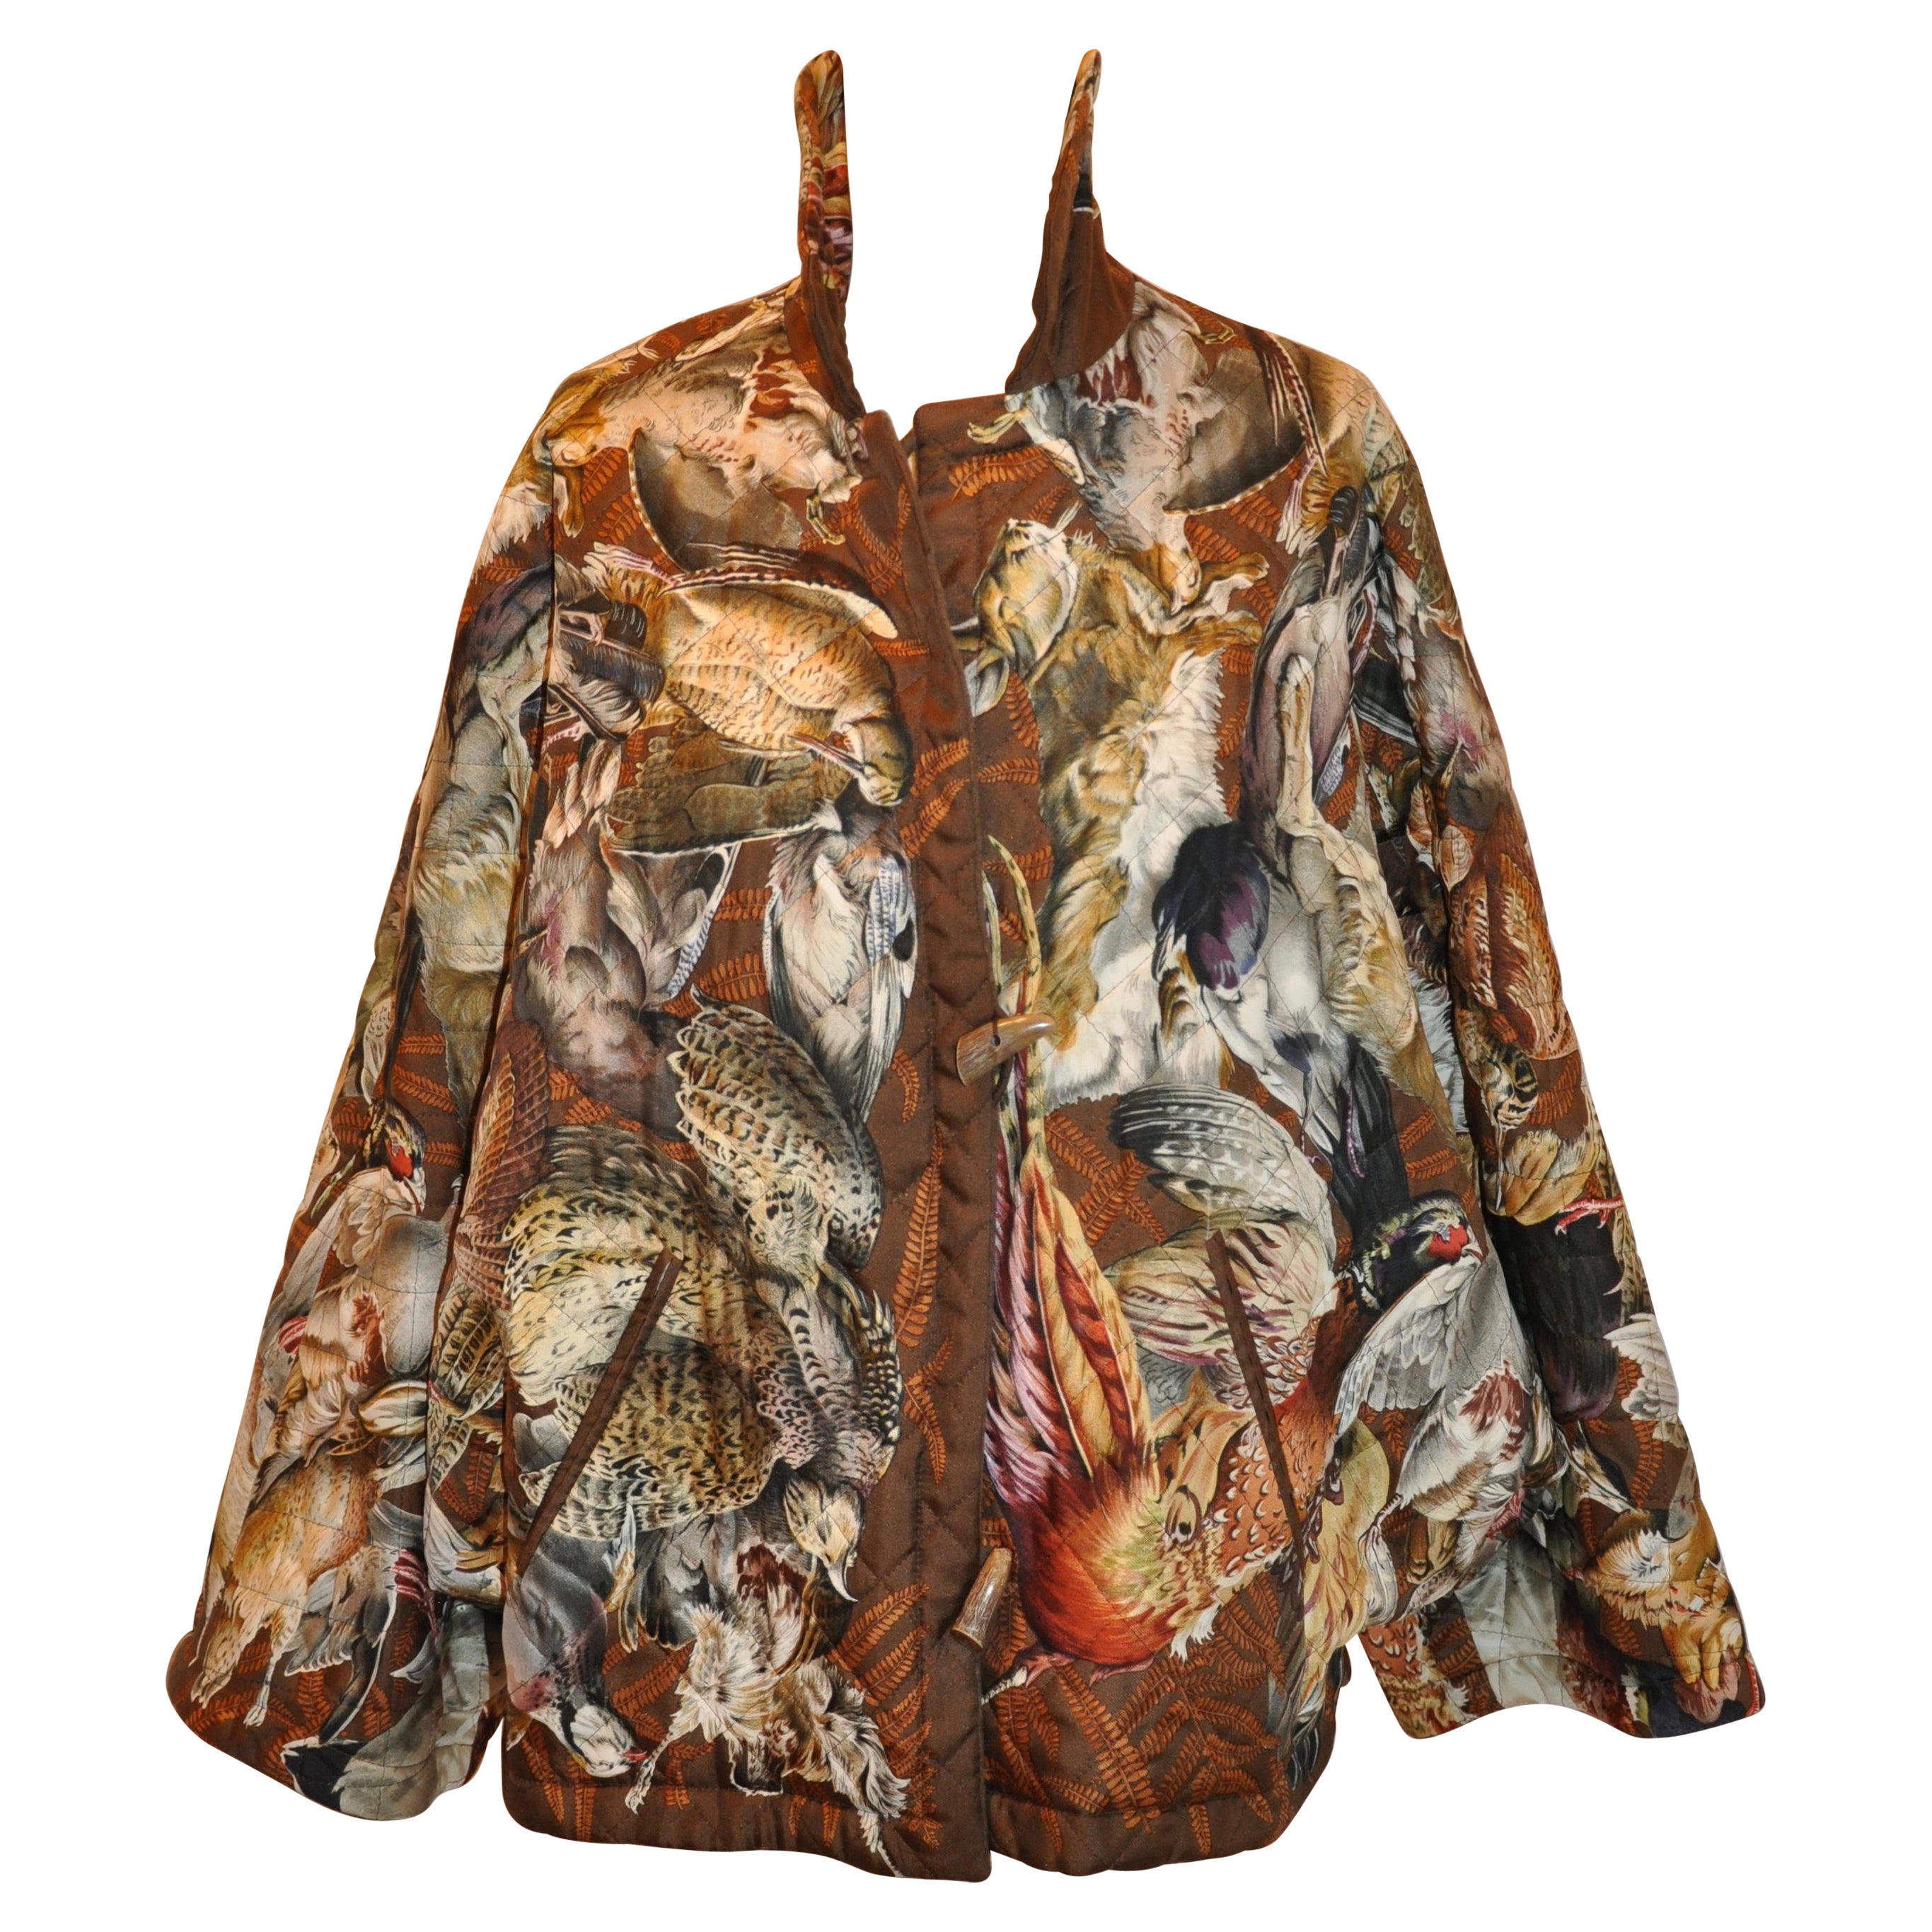 Hermes "Limited Edition" Reversible "Collection of Fowls" Cocoon Button Jacket